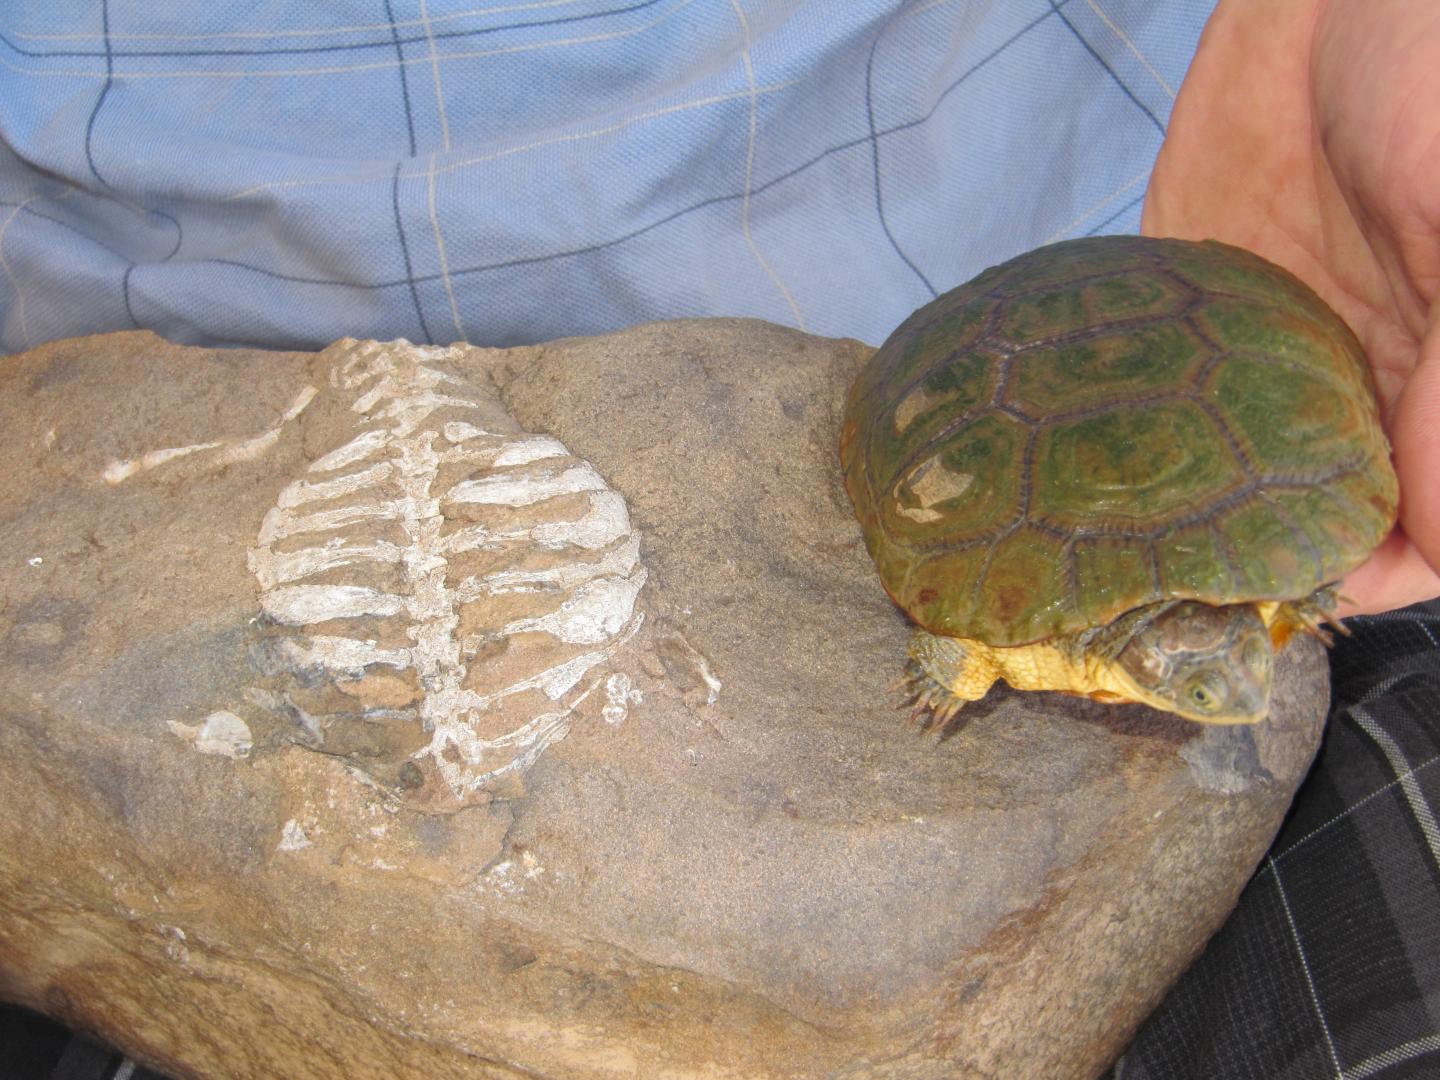 New Study Finds Highly Modified Abdominal Muscular Sling in Turtles